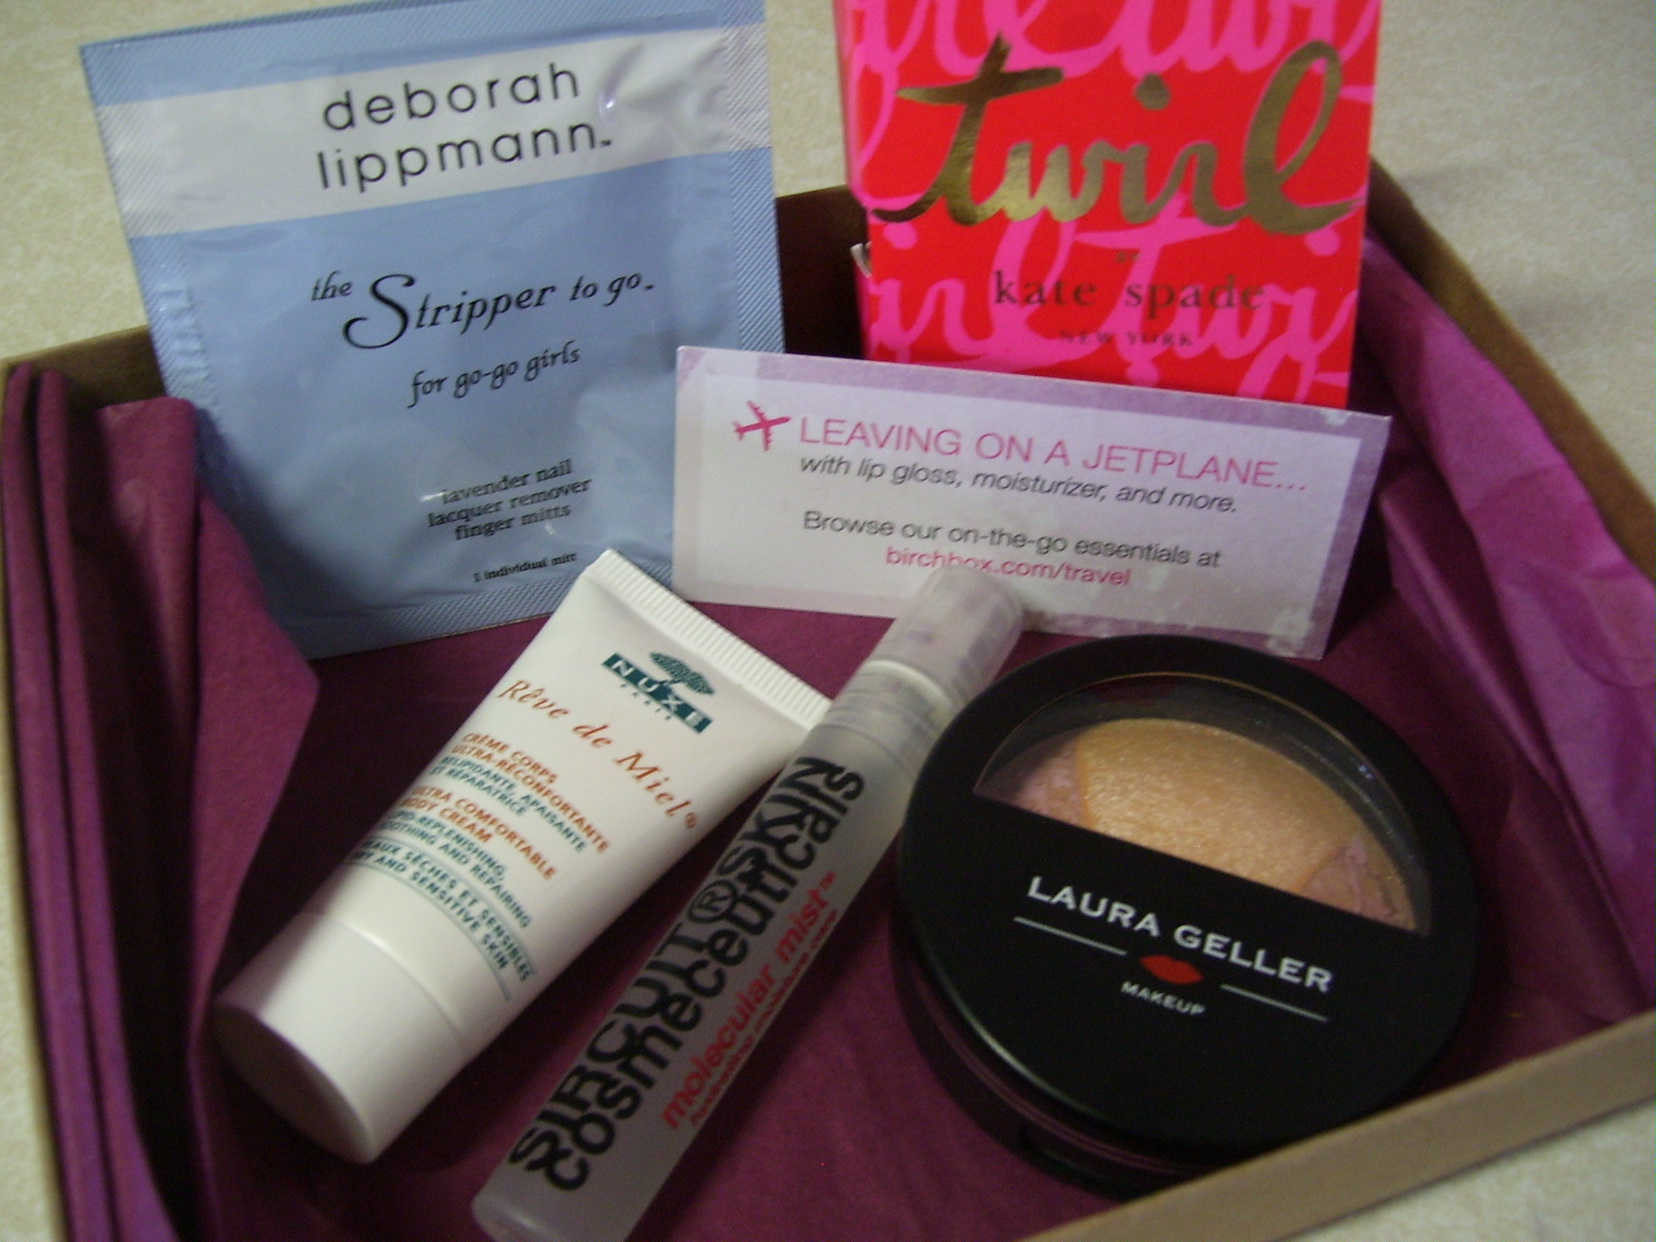 Final Thoughts on My June 2011 Birchbox Products